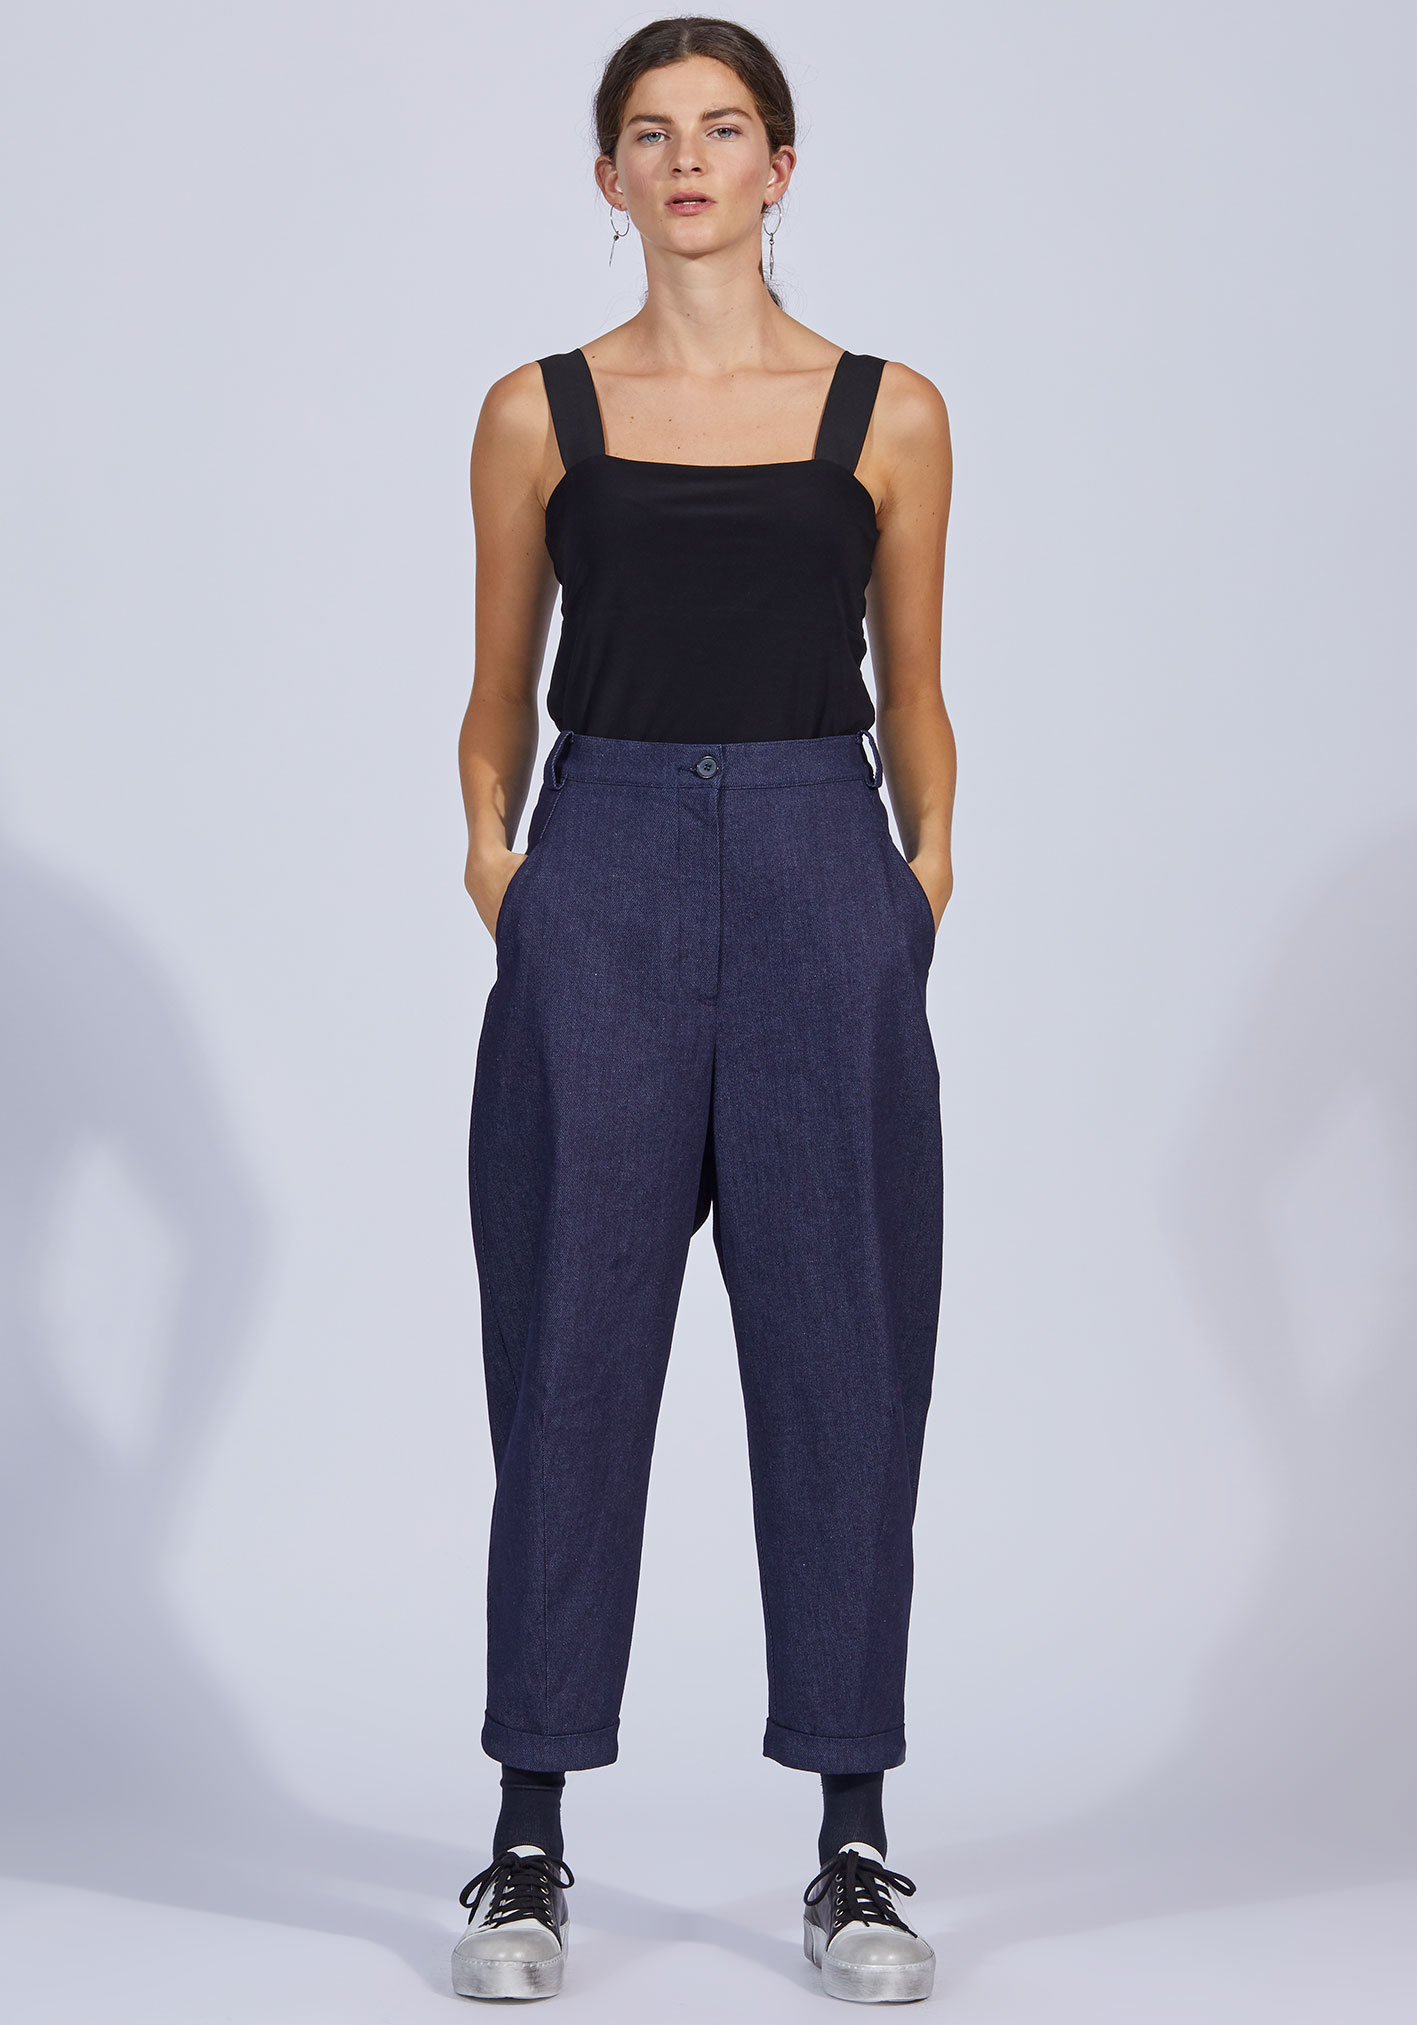 buy the latest Pitch Angle Pant online